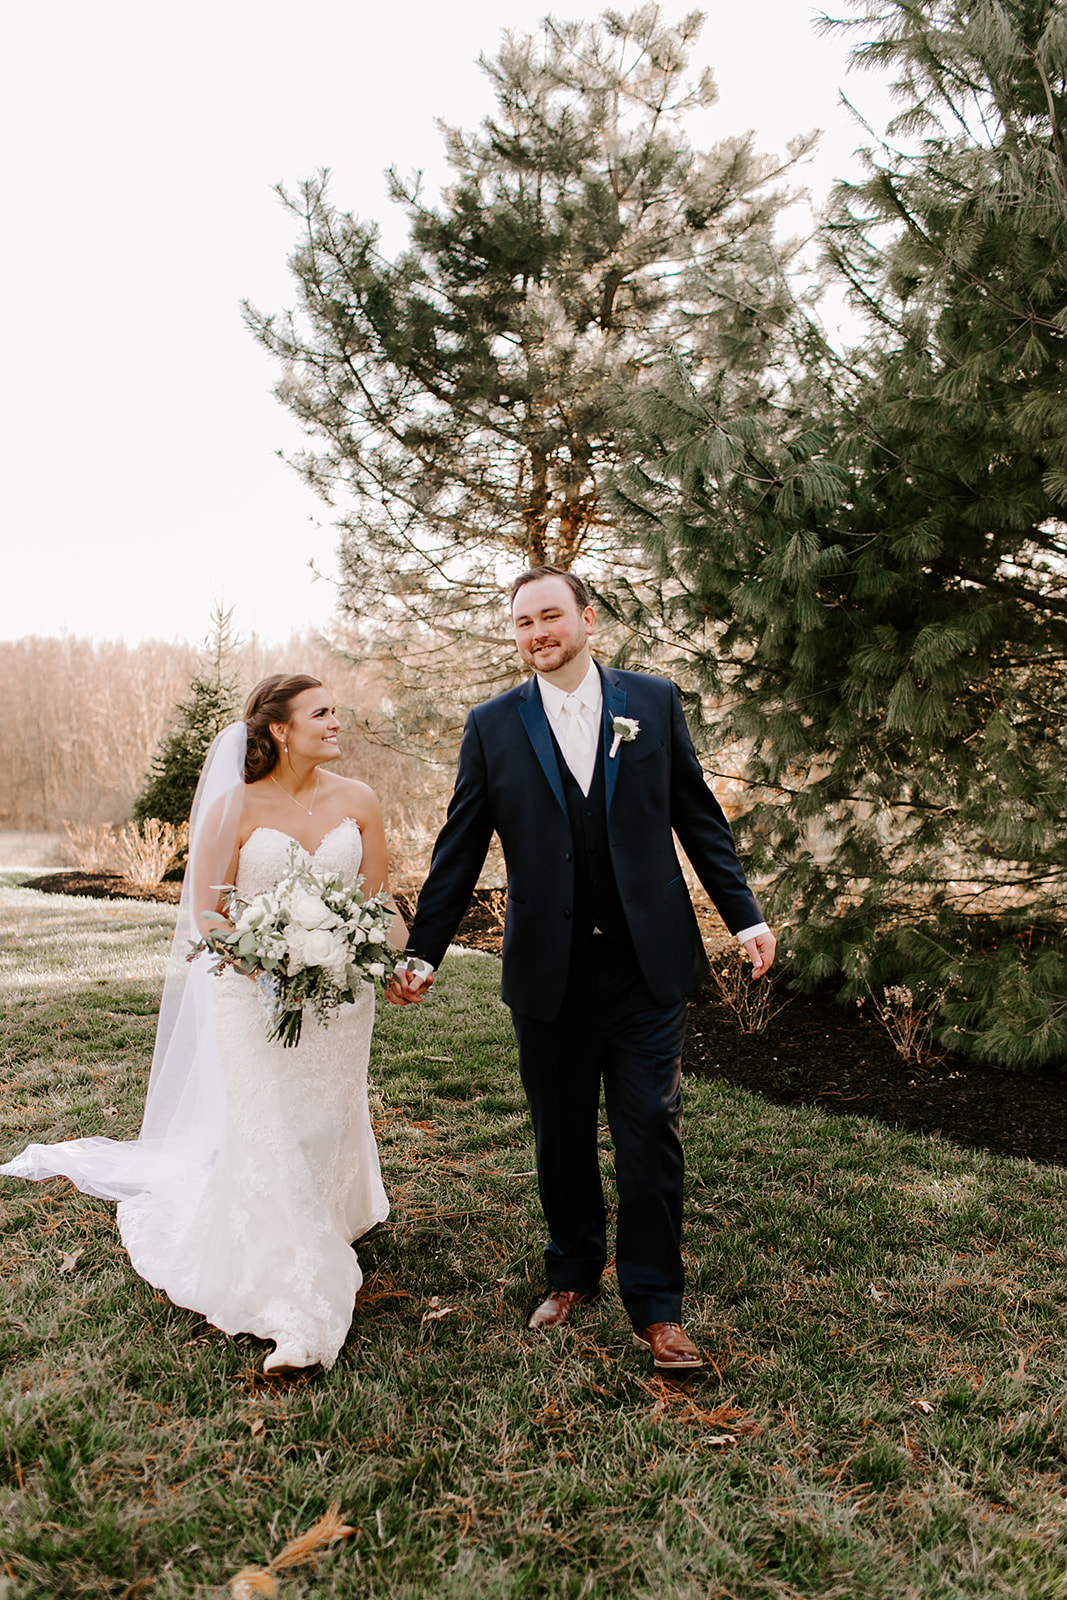 Lauren_and_Andrew_Mustard_Seed_Gardens_Noblesville_Indiana_by_Emily_Wehner_Photography-693.jpg